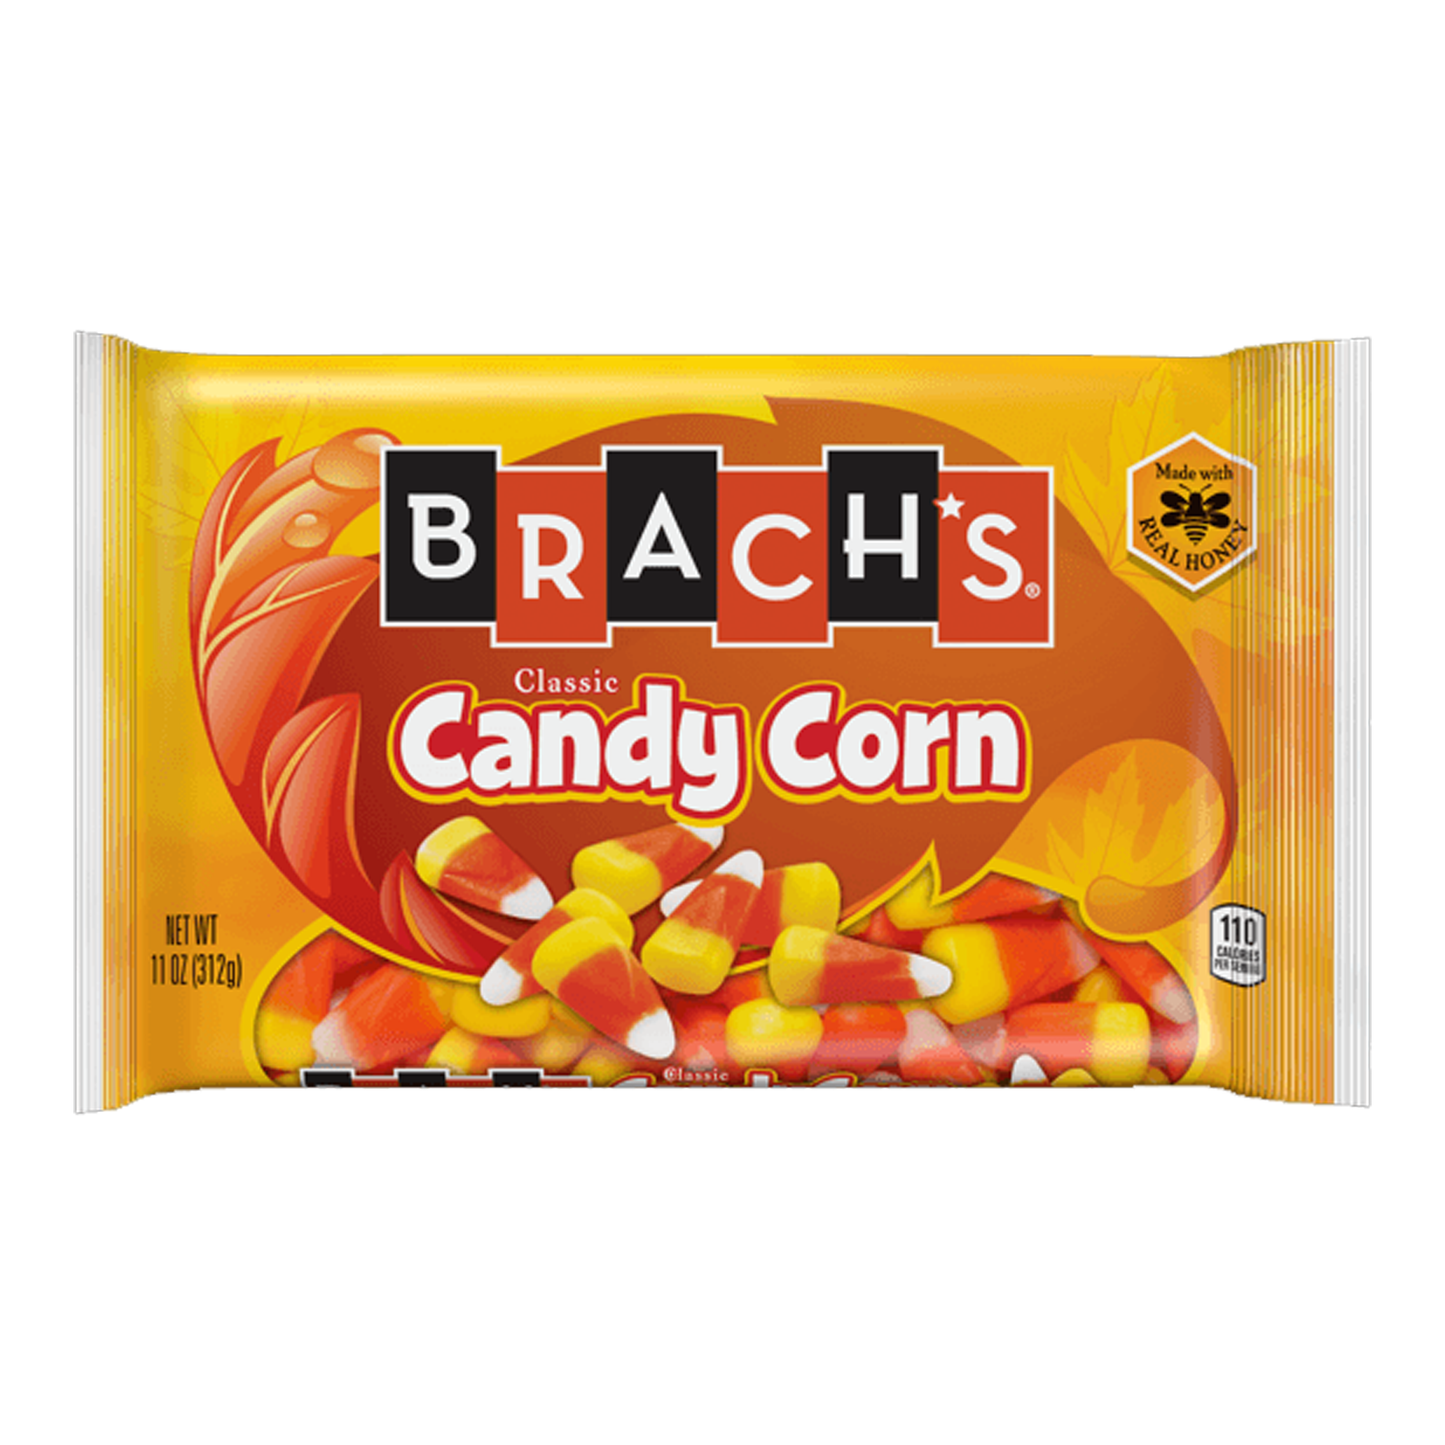 Brach's Classic Candy Corn 312g sold by American Grocer in the UK